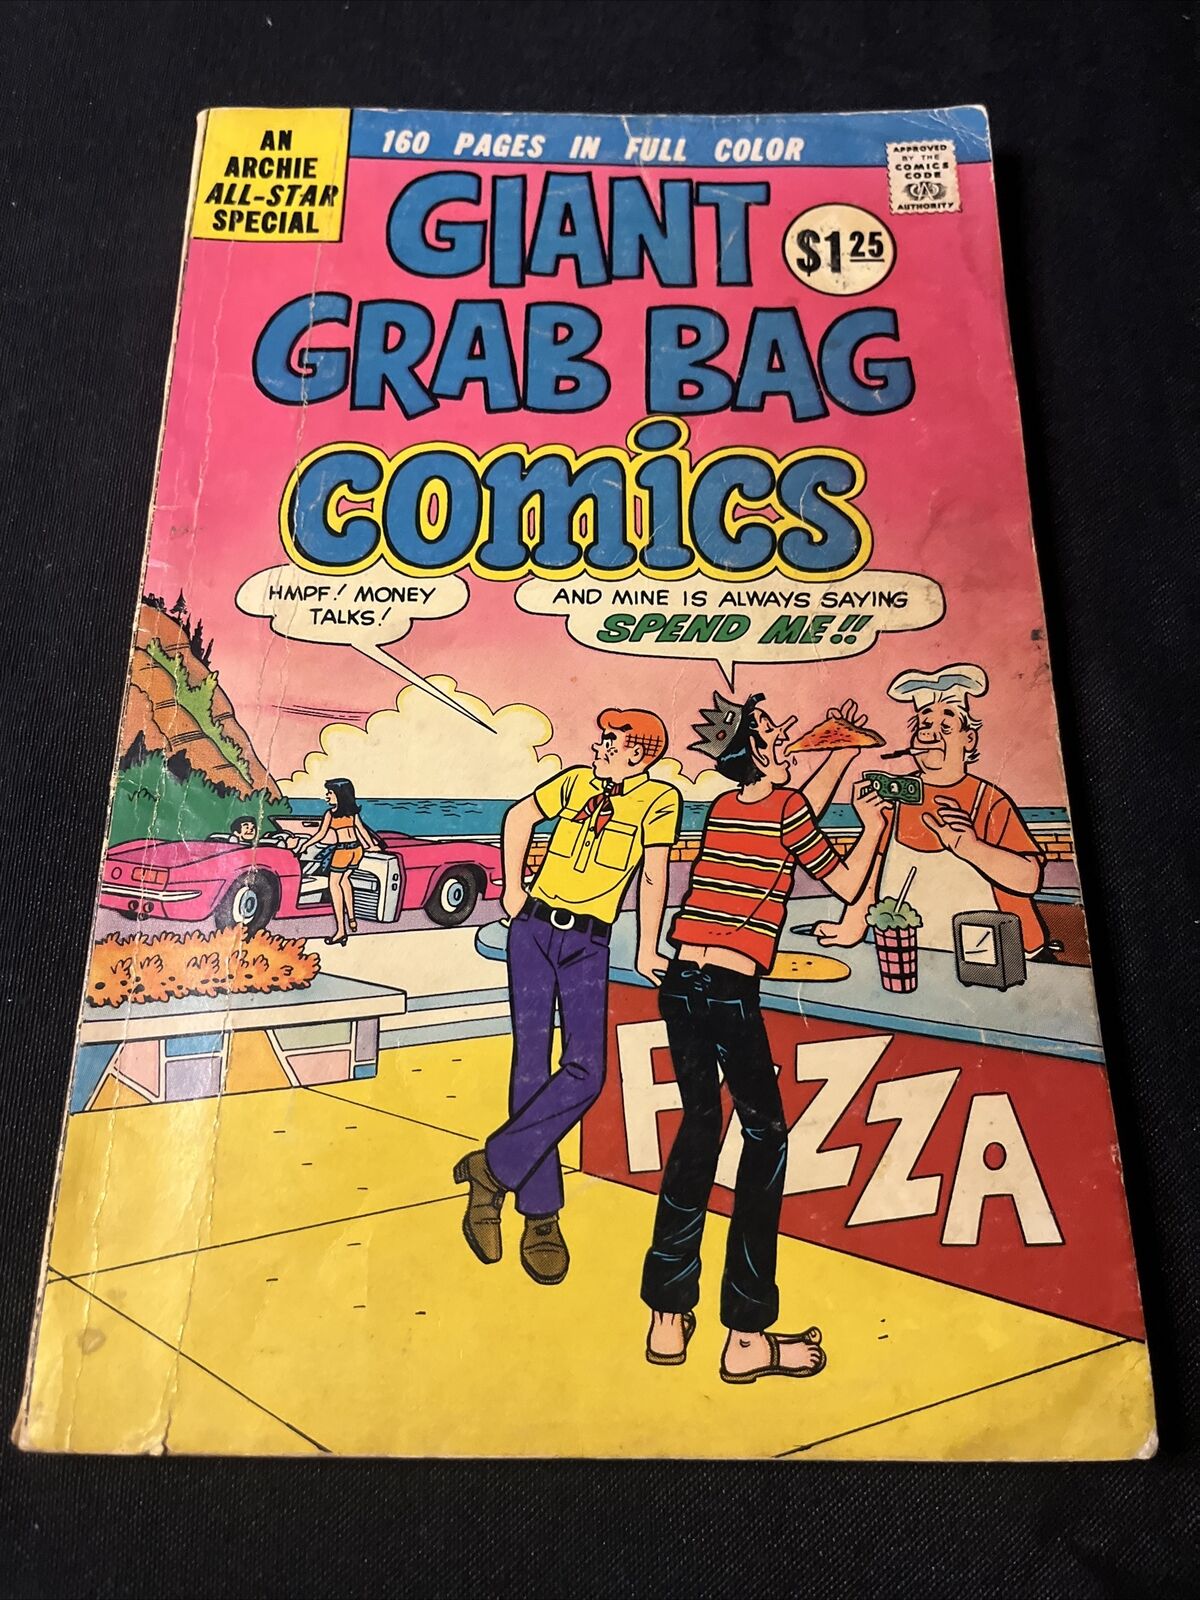 1975 Giant Grab Bag Comics An Archie All-Star Special